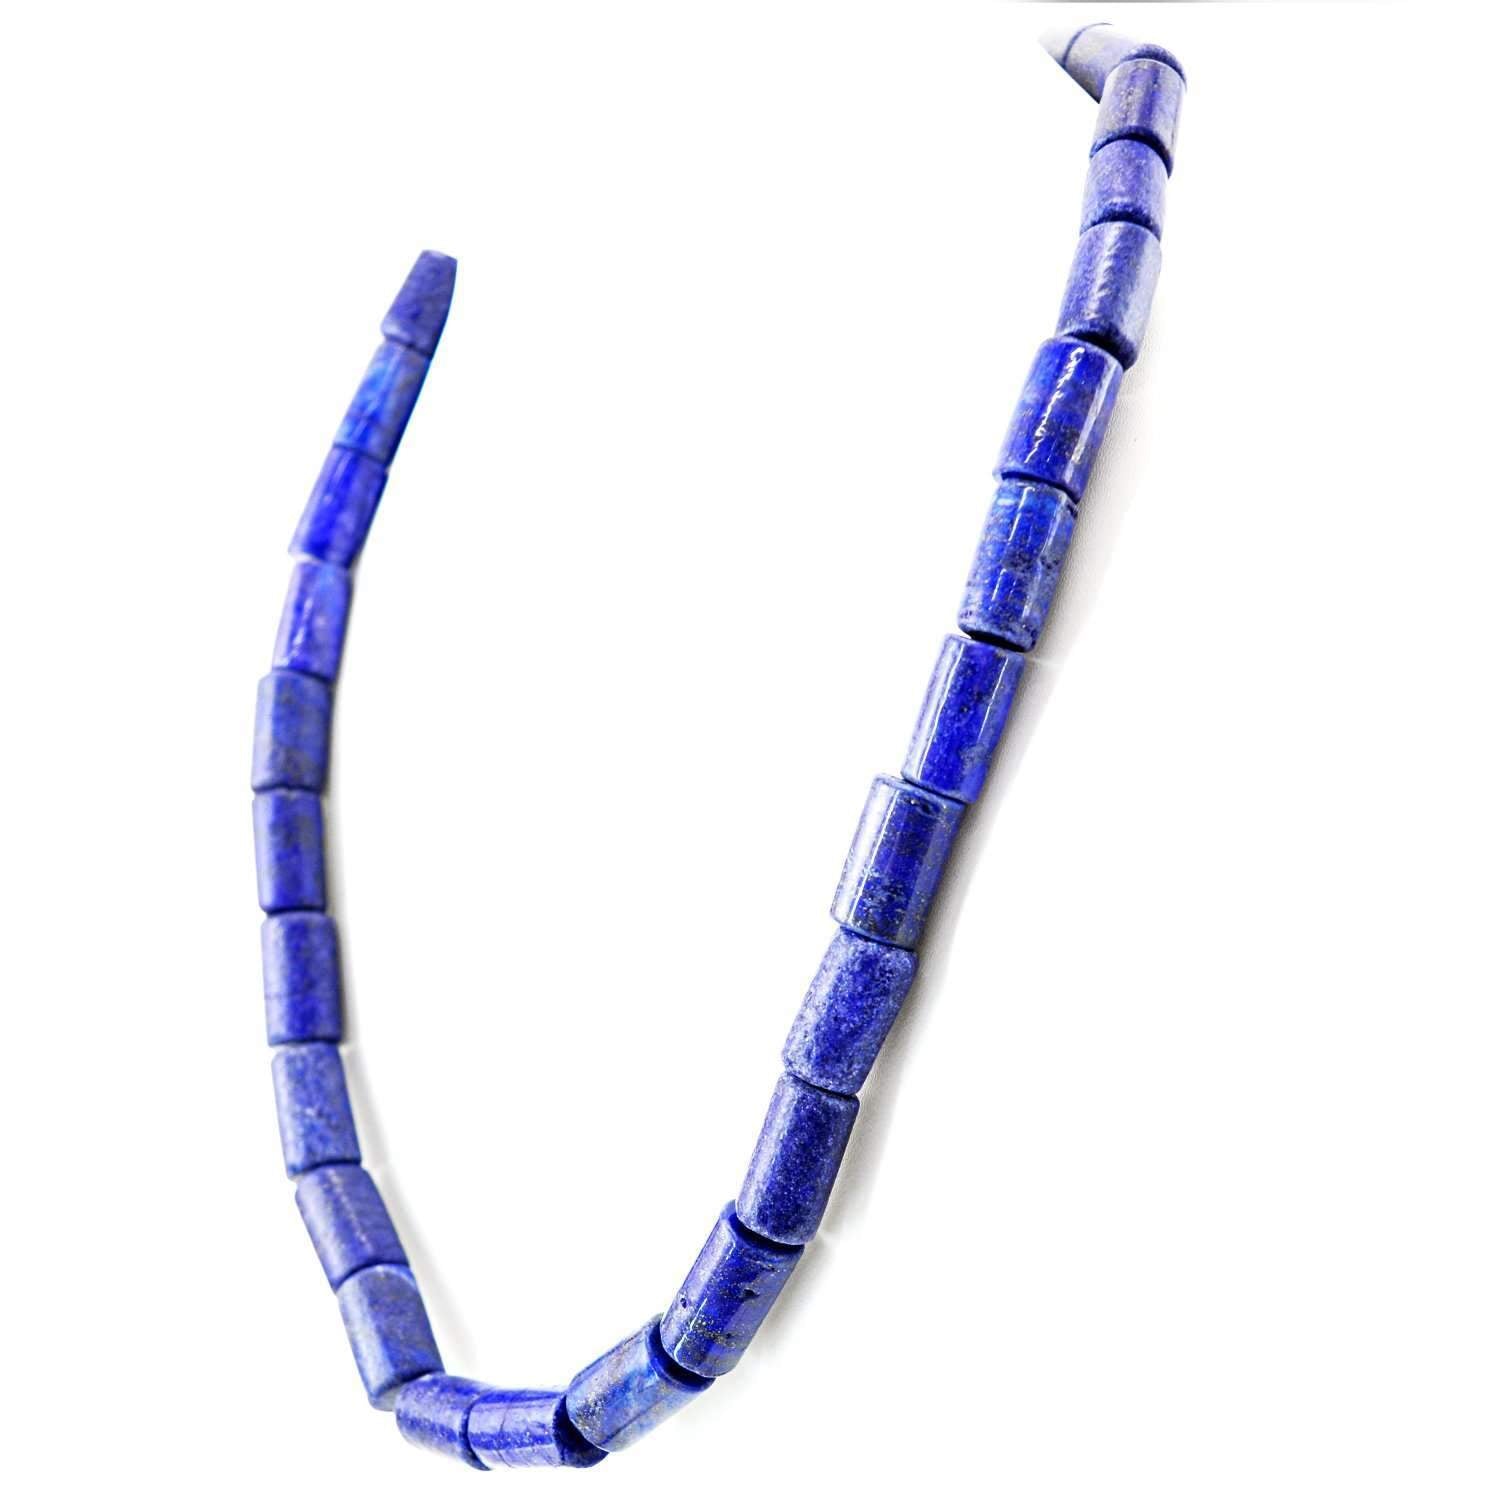 gemsmore:Blue Lapis Lazuli Necklace Natural 20 Inches Long Untreated Beads